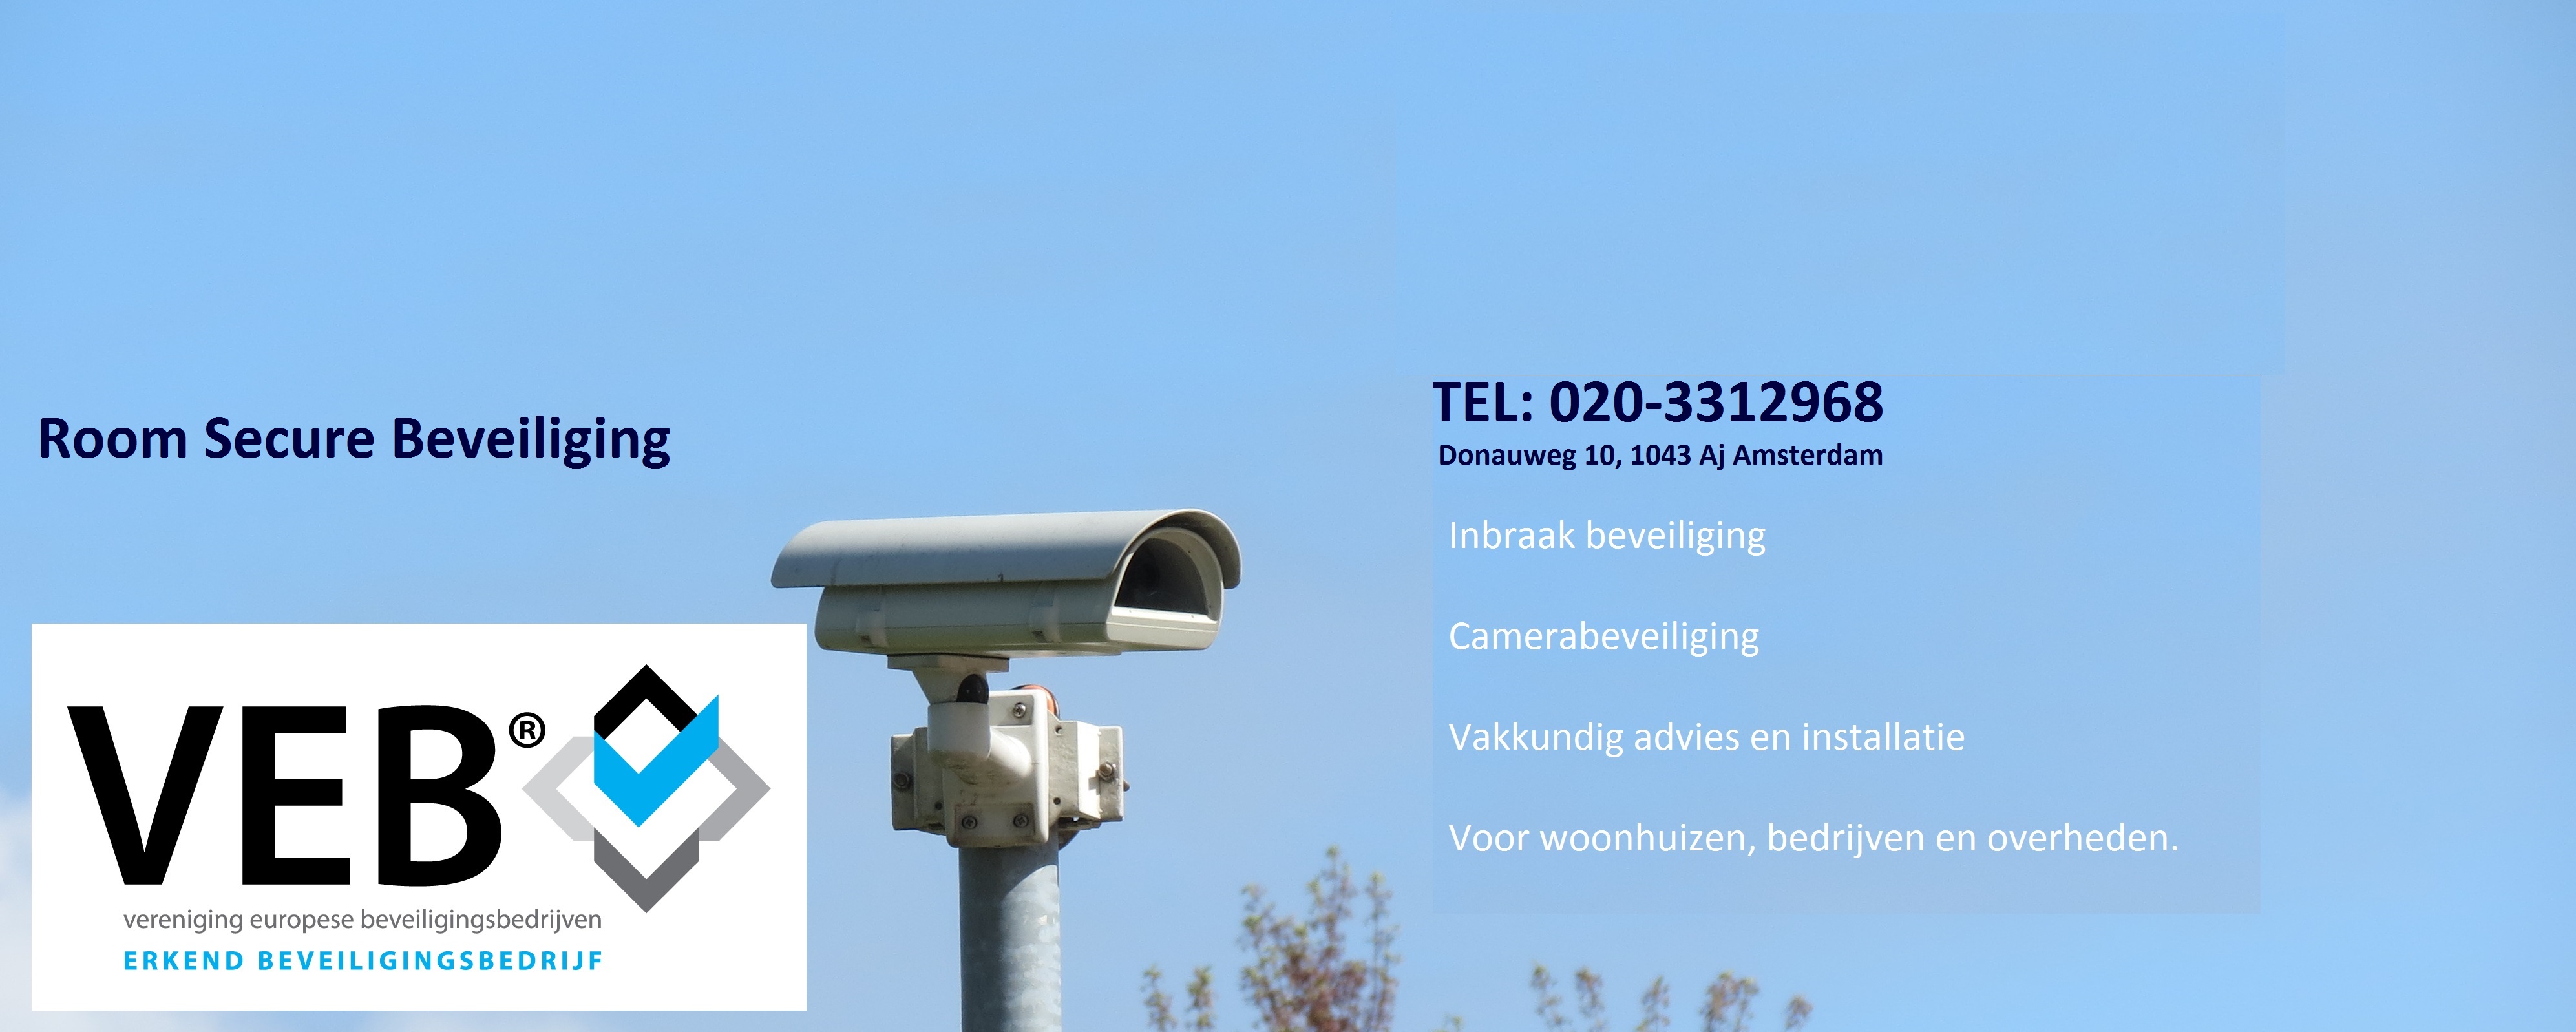 (c) Roomsecure.nl